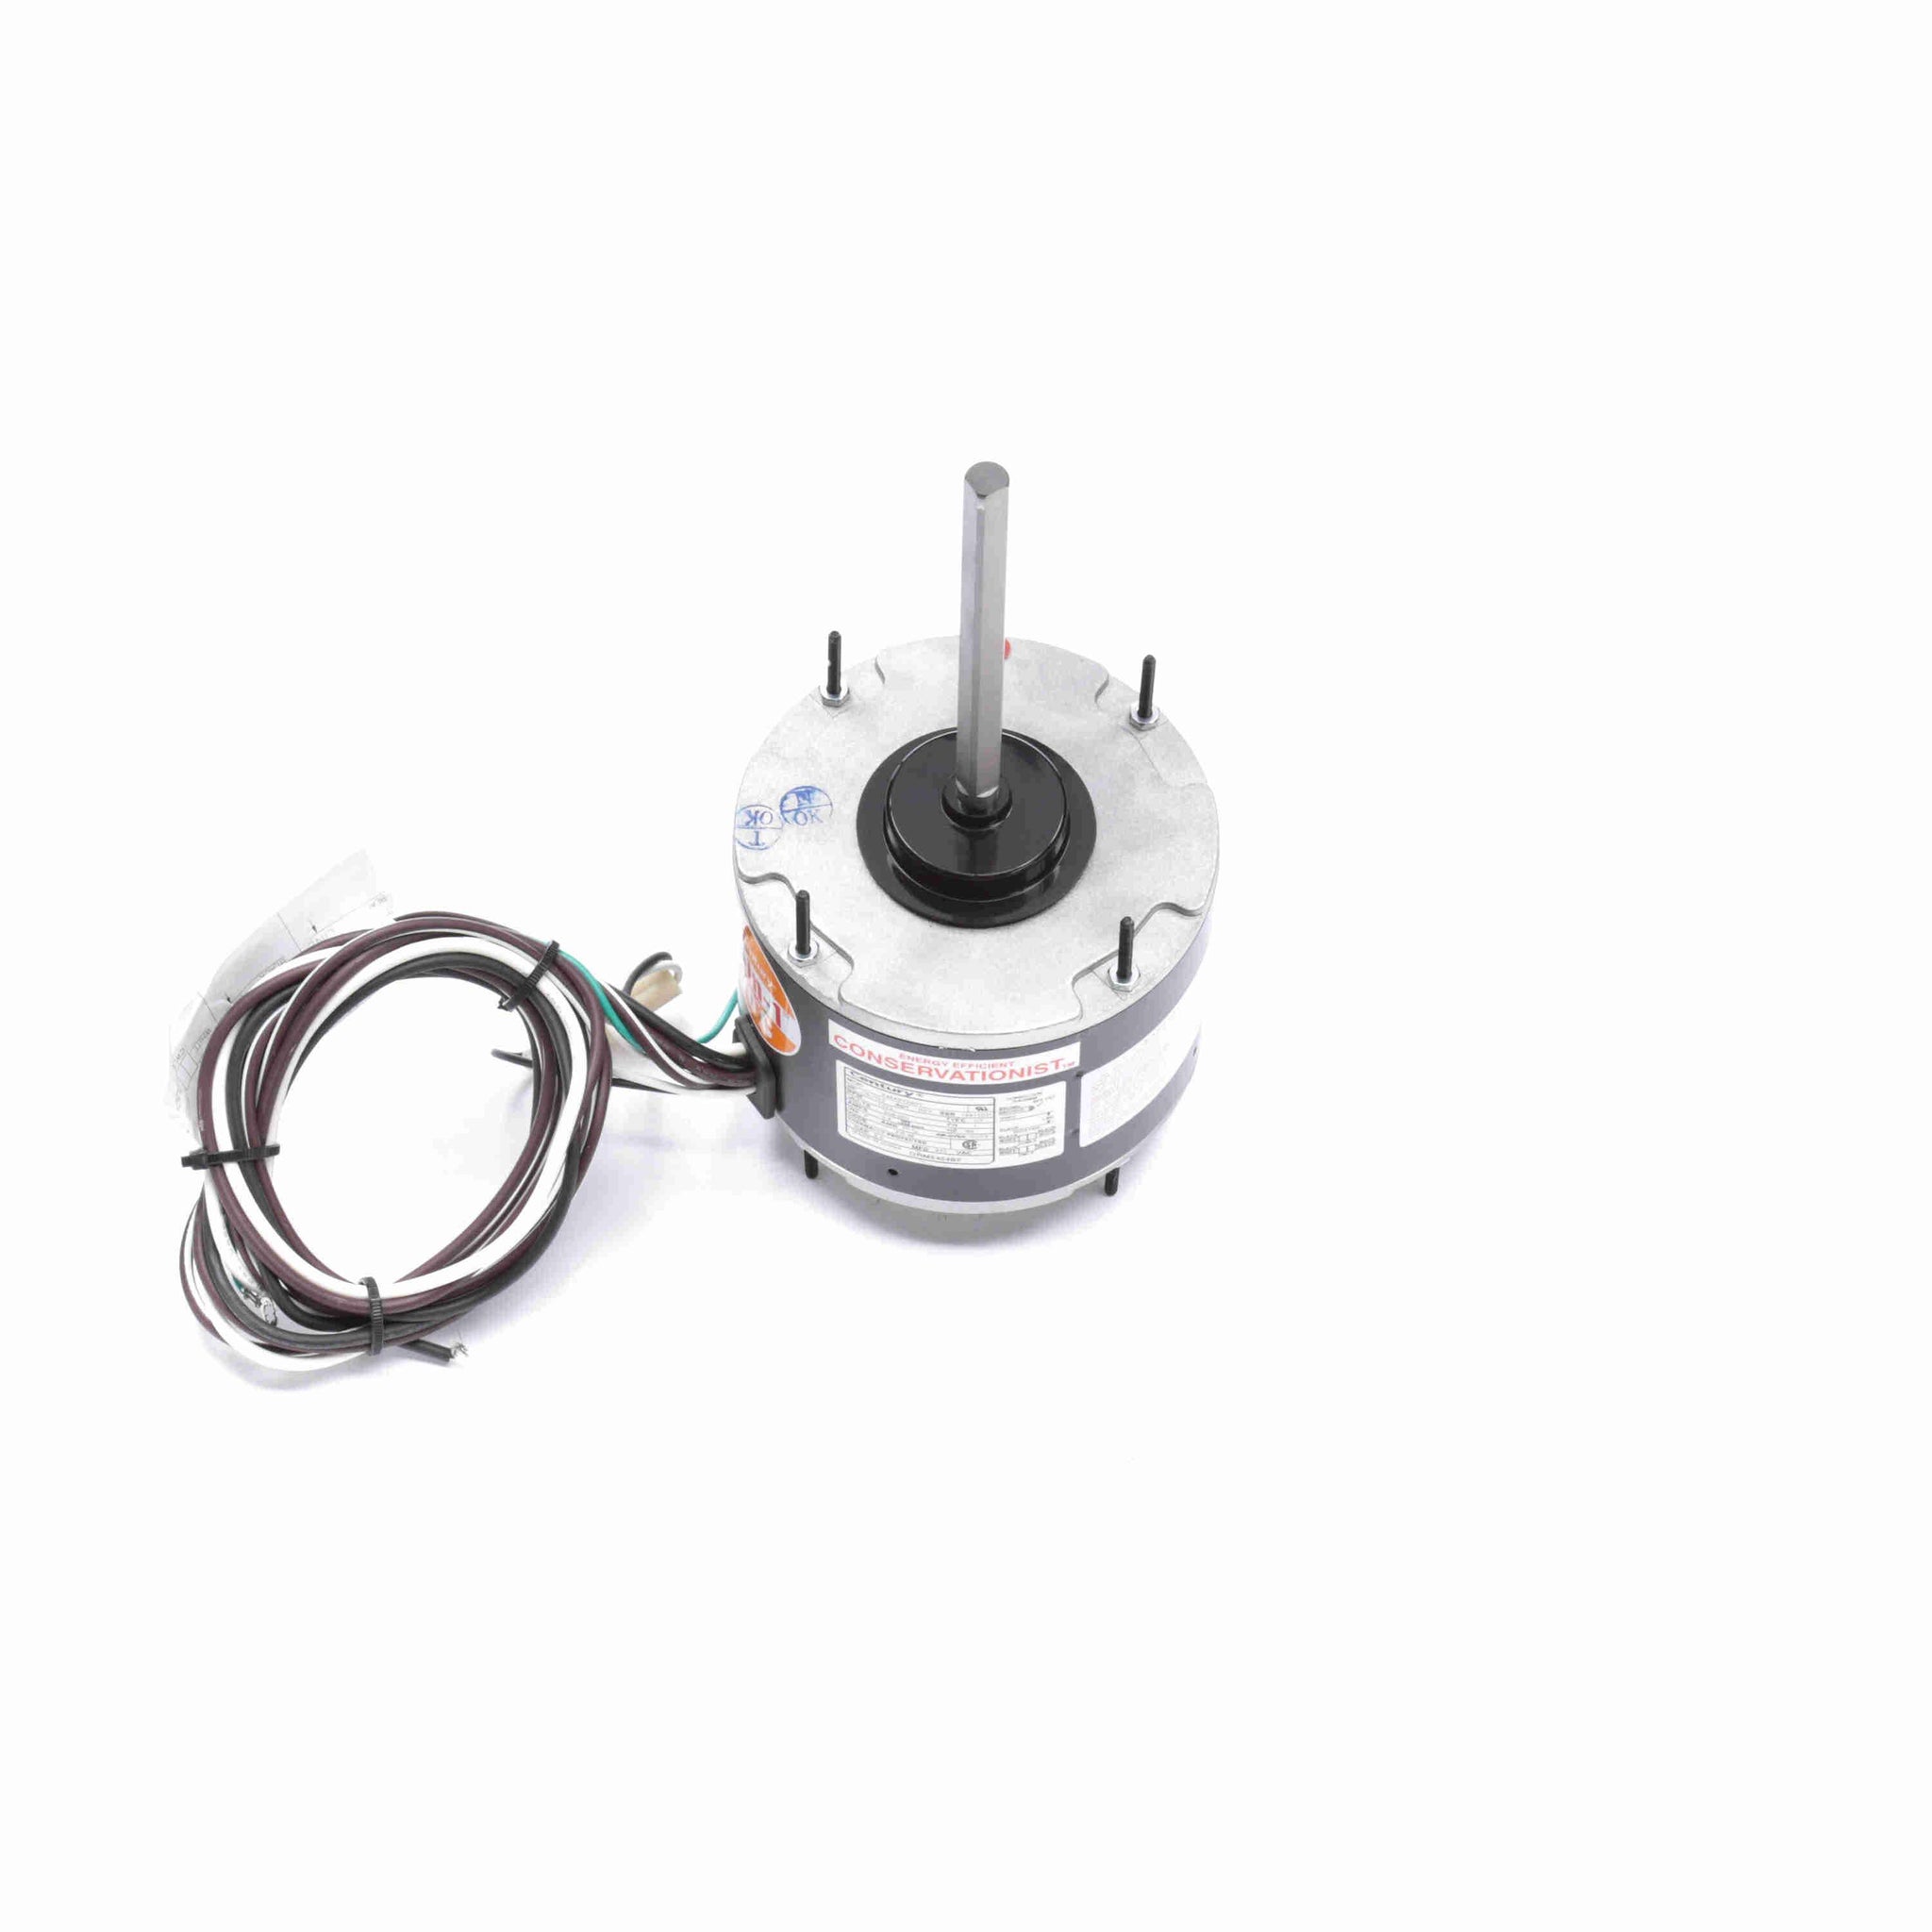 ORM5454BF - 1/8-1/15 HP Condenser Fan Motor, 1075 RPM, 1 Speed, 208-230 Volts, 48 Frame, TEAO - Hardware & Moreee